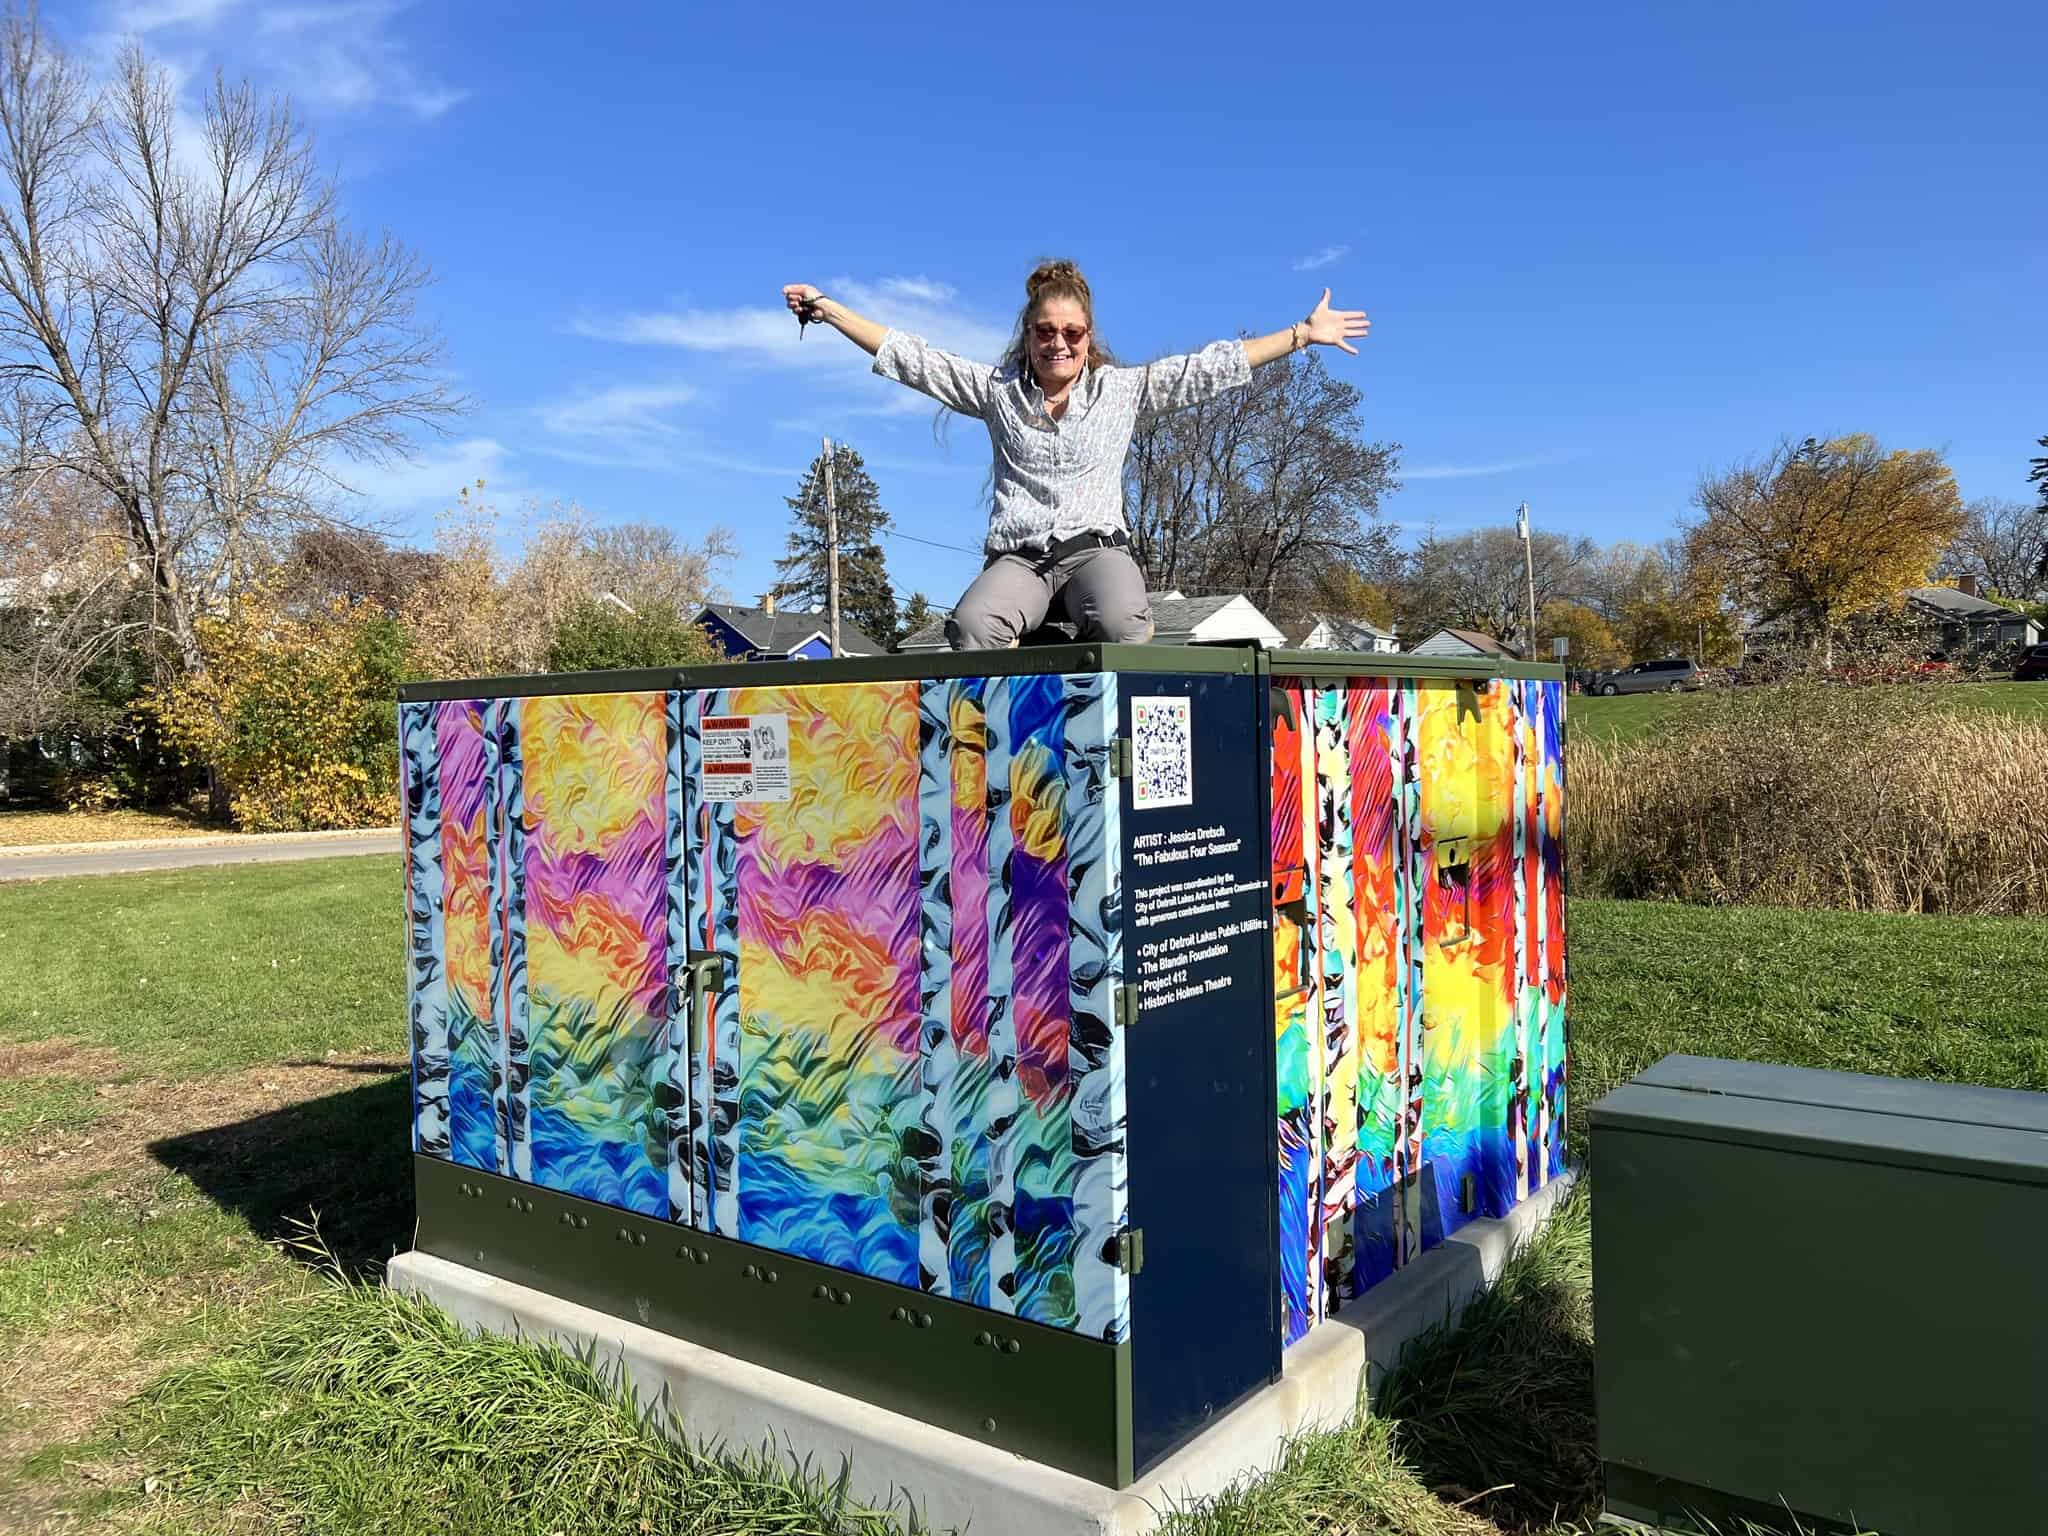 "The Fabulous Four Seasons" power box art wrap • Jessica Dretsch on top of the power box • behind Sanford clinic • Artist: Jessica Dretsch • Power box created in coordination with Arts & Culture Commission and the City of Detroit Lakes Public Utilities